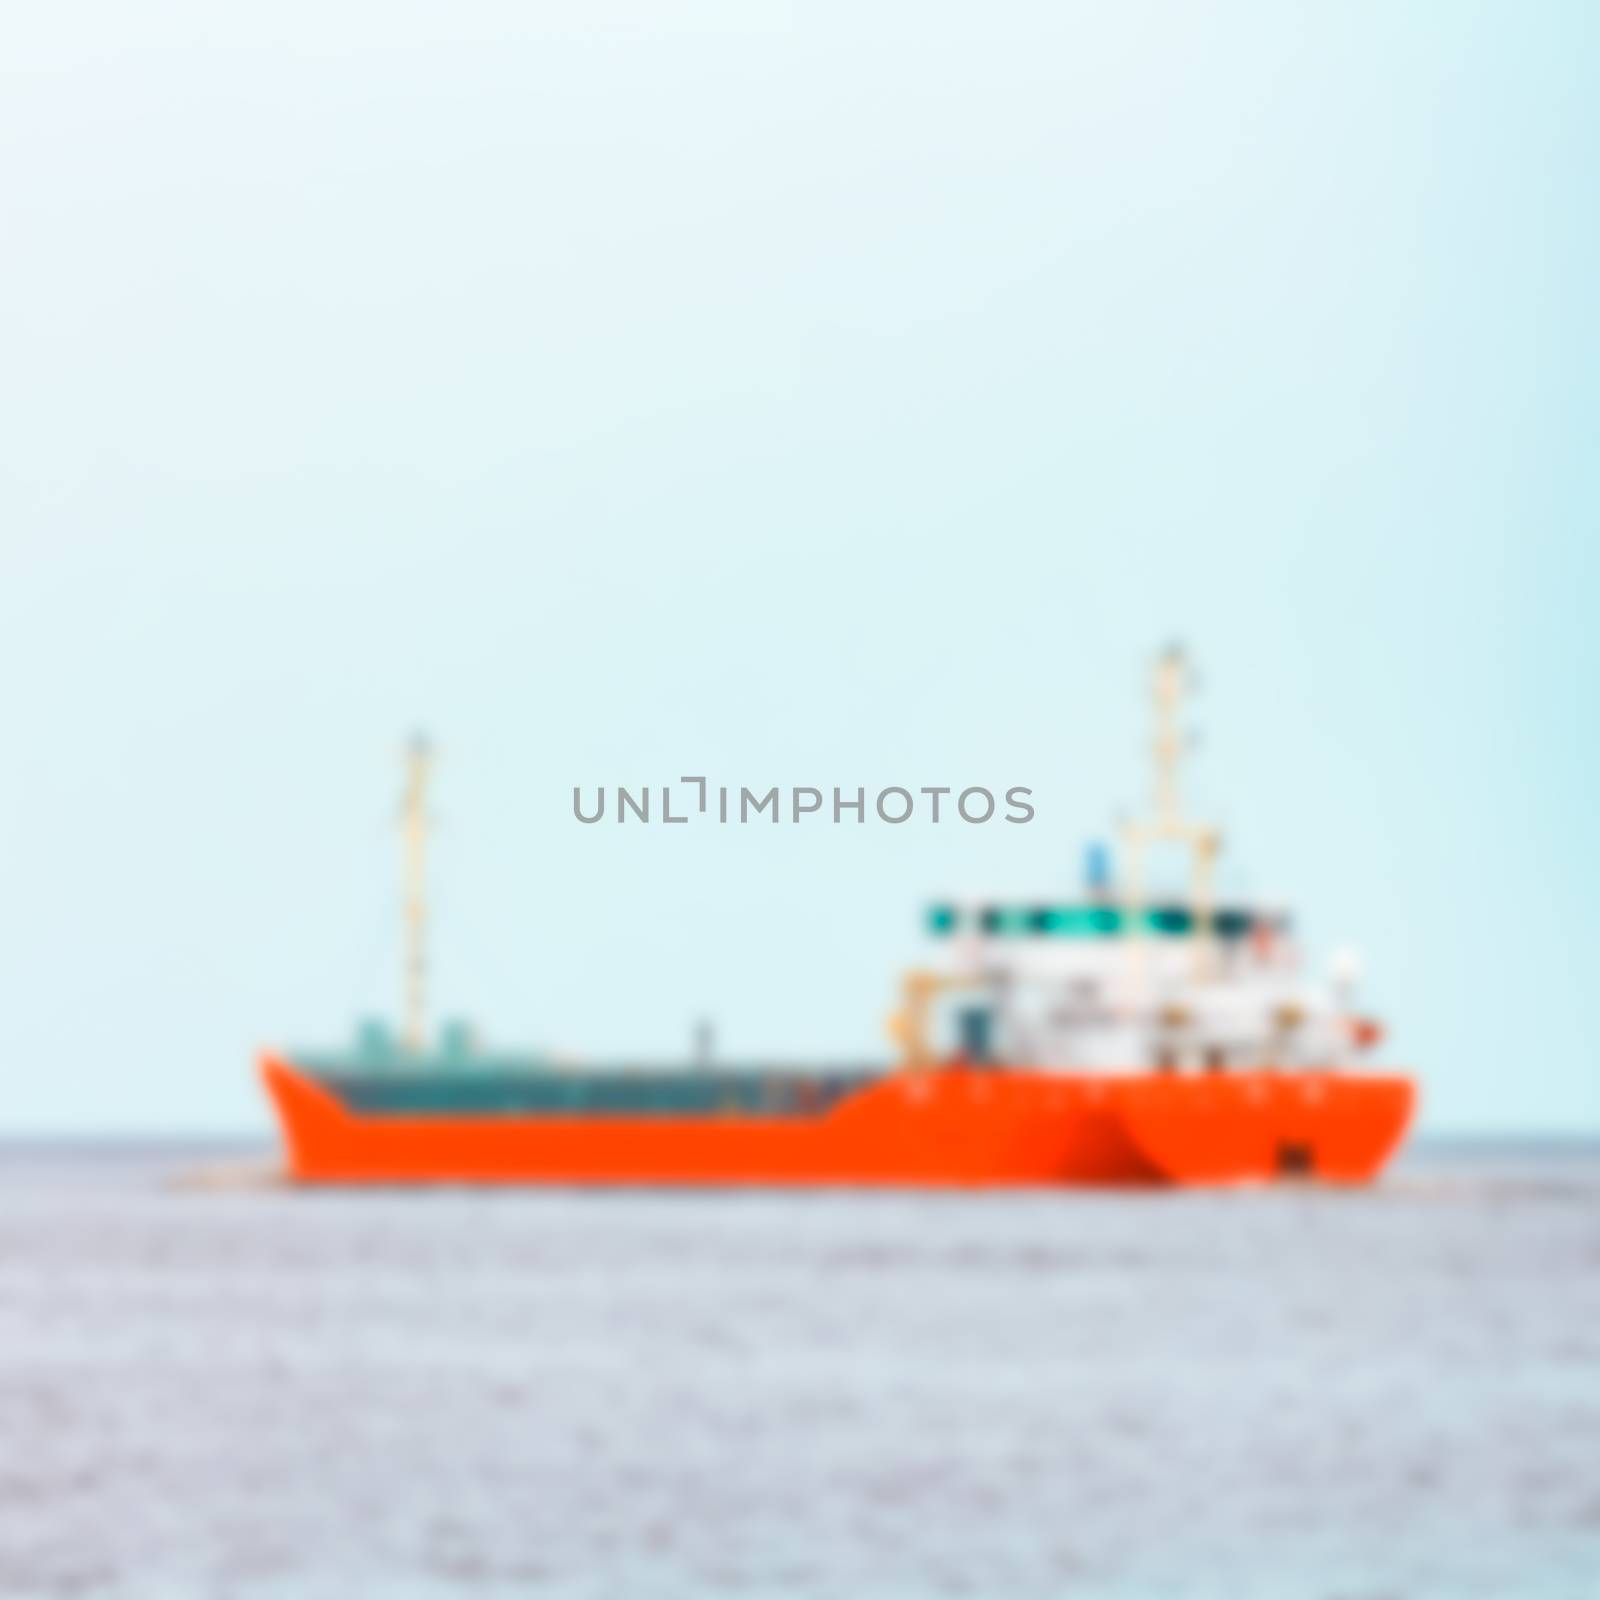 Red cargo ship - blurred image by sengnsp